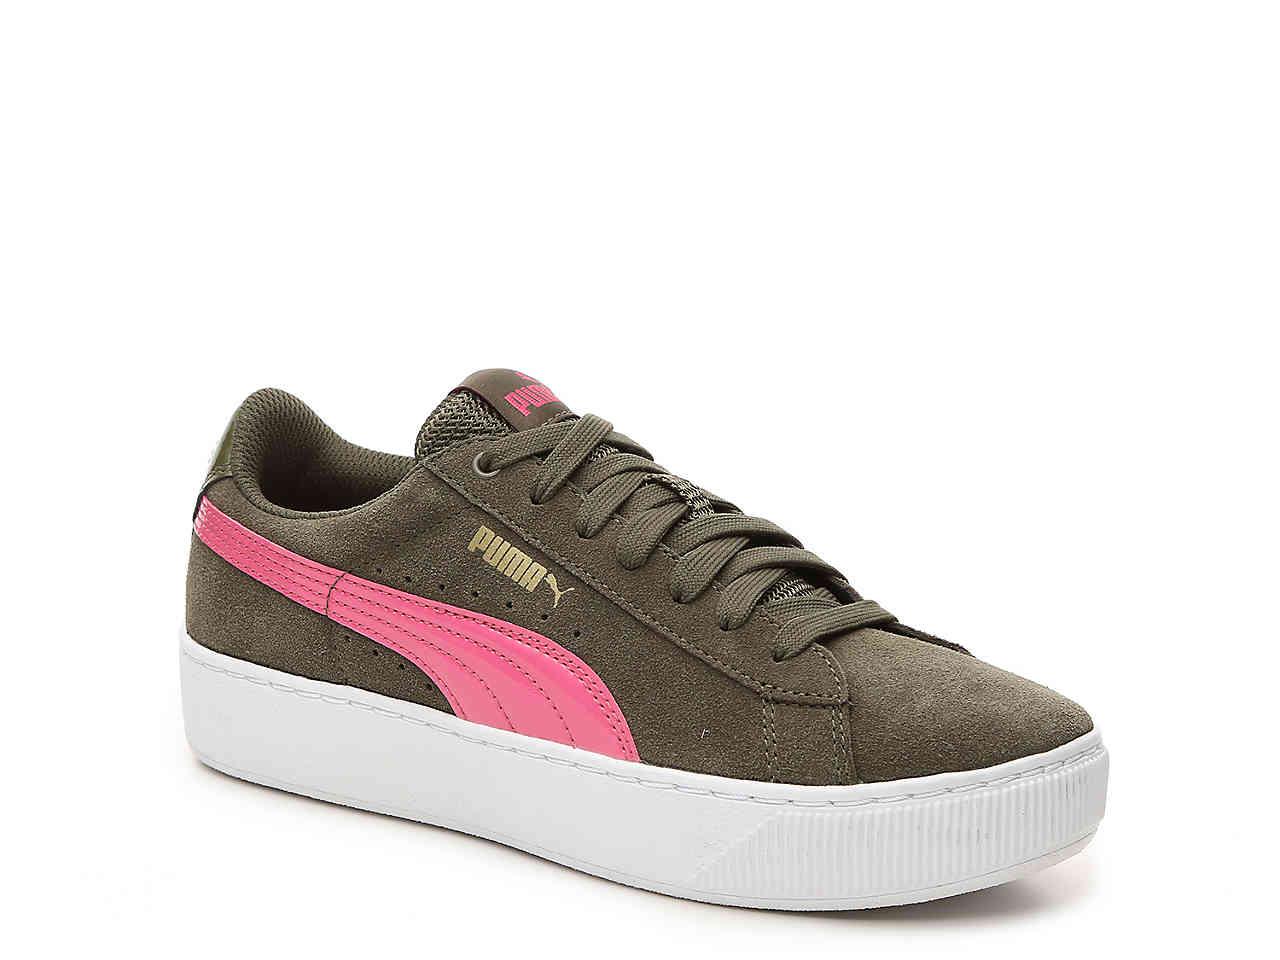 olive green and pink pumas - 57% OFF 